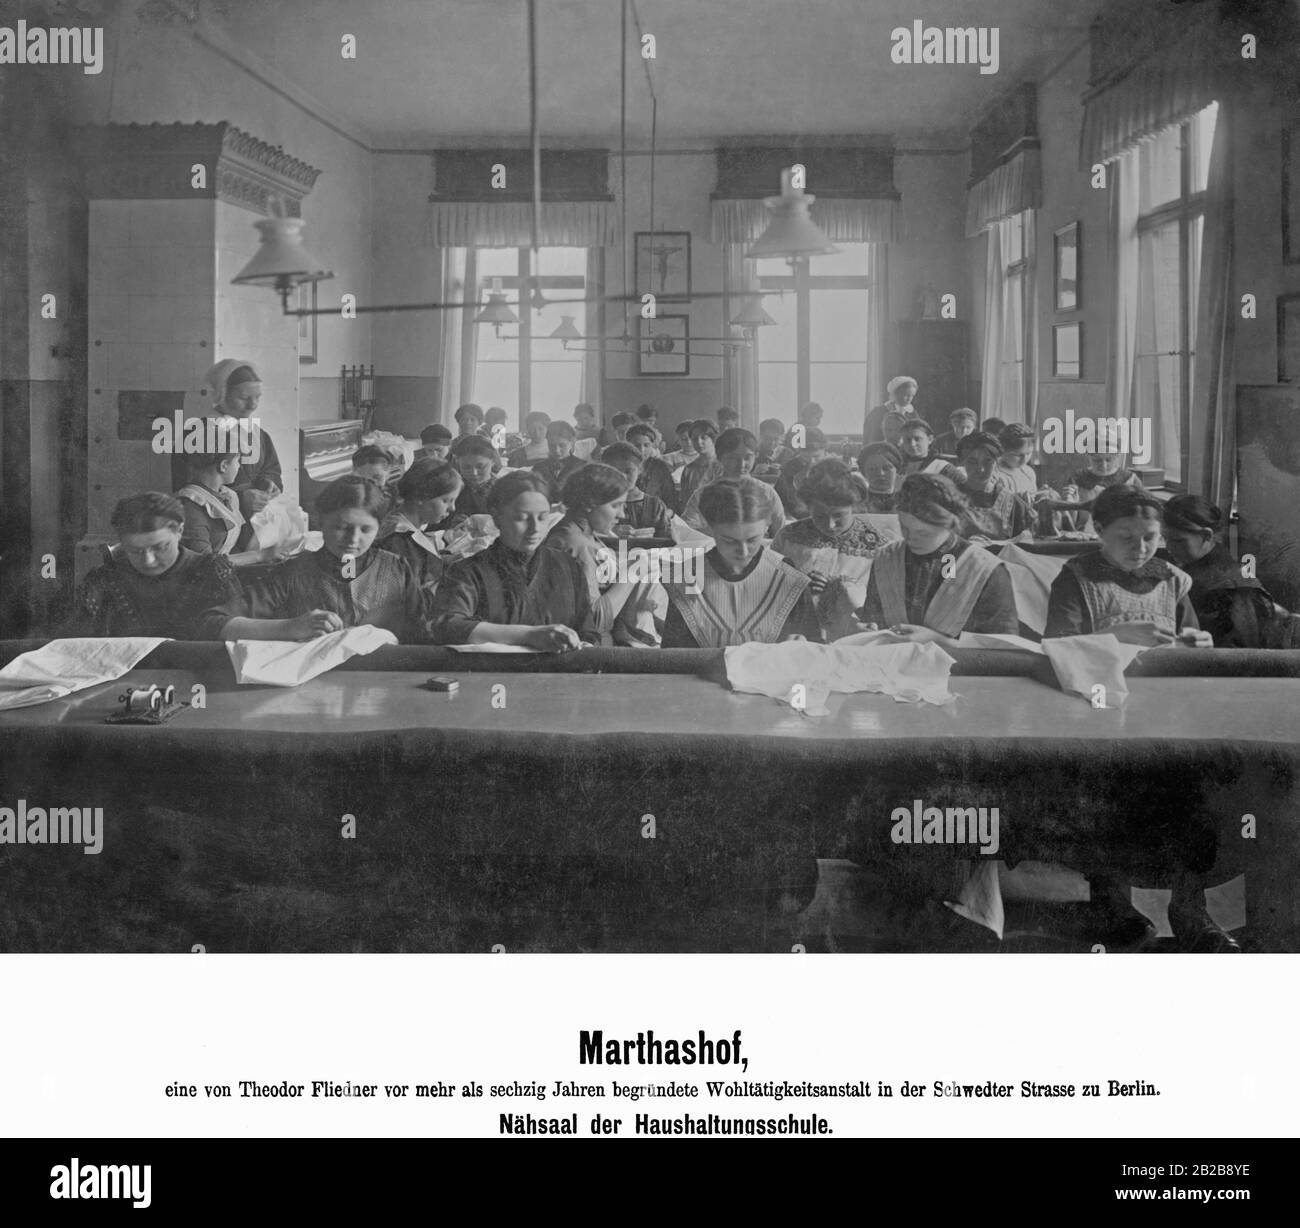 The photo shows the sewing room of the Marthashof Home Economics School in Schwedter Strasse in Berlin. This is a charitable institution founded by the protestant pastor Theodor Fliedner. Stock Photo